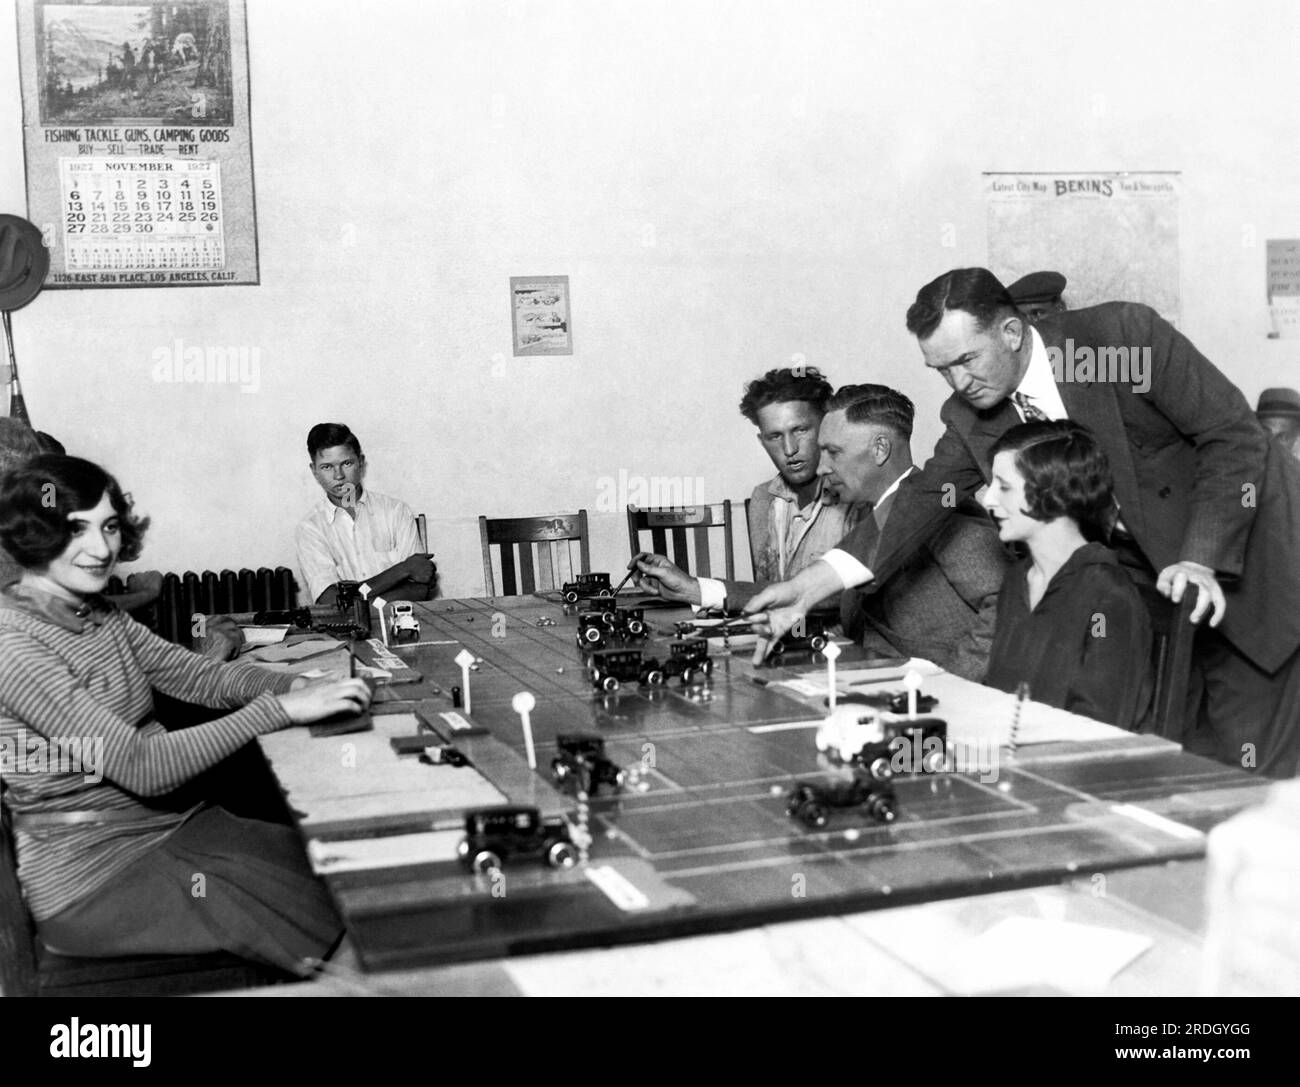 Los Angeles, California:  November 21, 1927 Drivers' license applicants in Los Angeles first have to demonstrate their knowledge of trafic using model cars on a table with a miniature scene of traffic on a street. Here the examiner is untangling a trsffic jam and expalining to the prospective drivers how it occured. Stock Photo